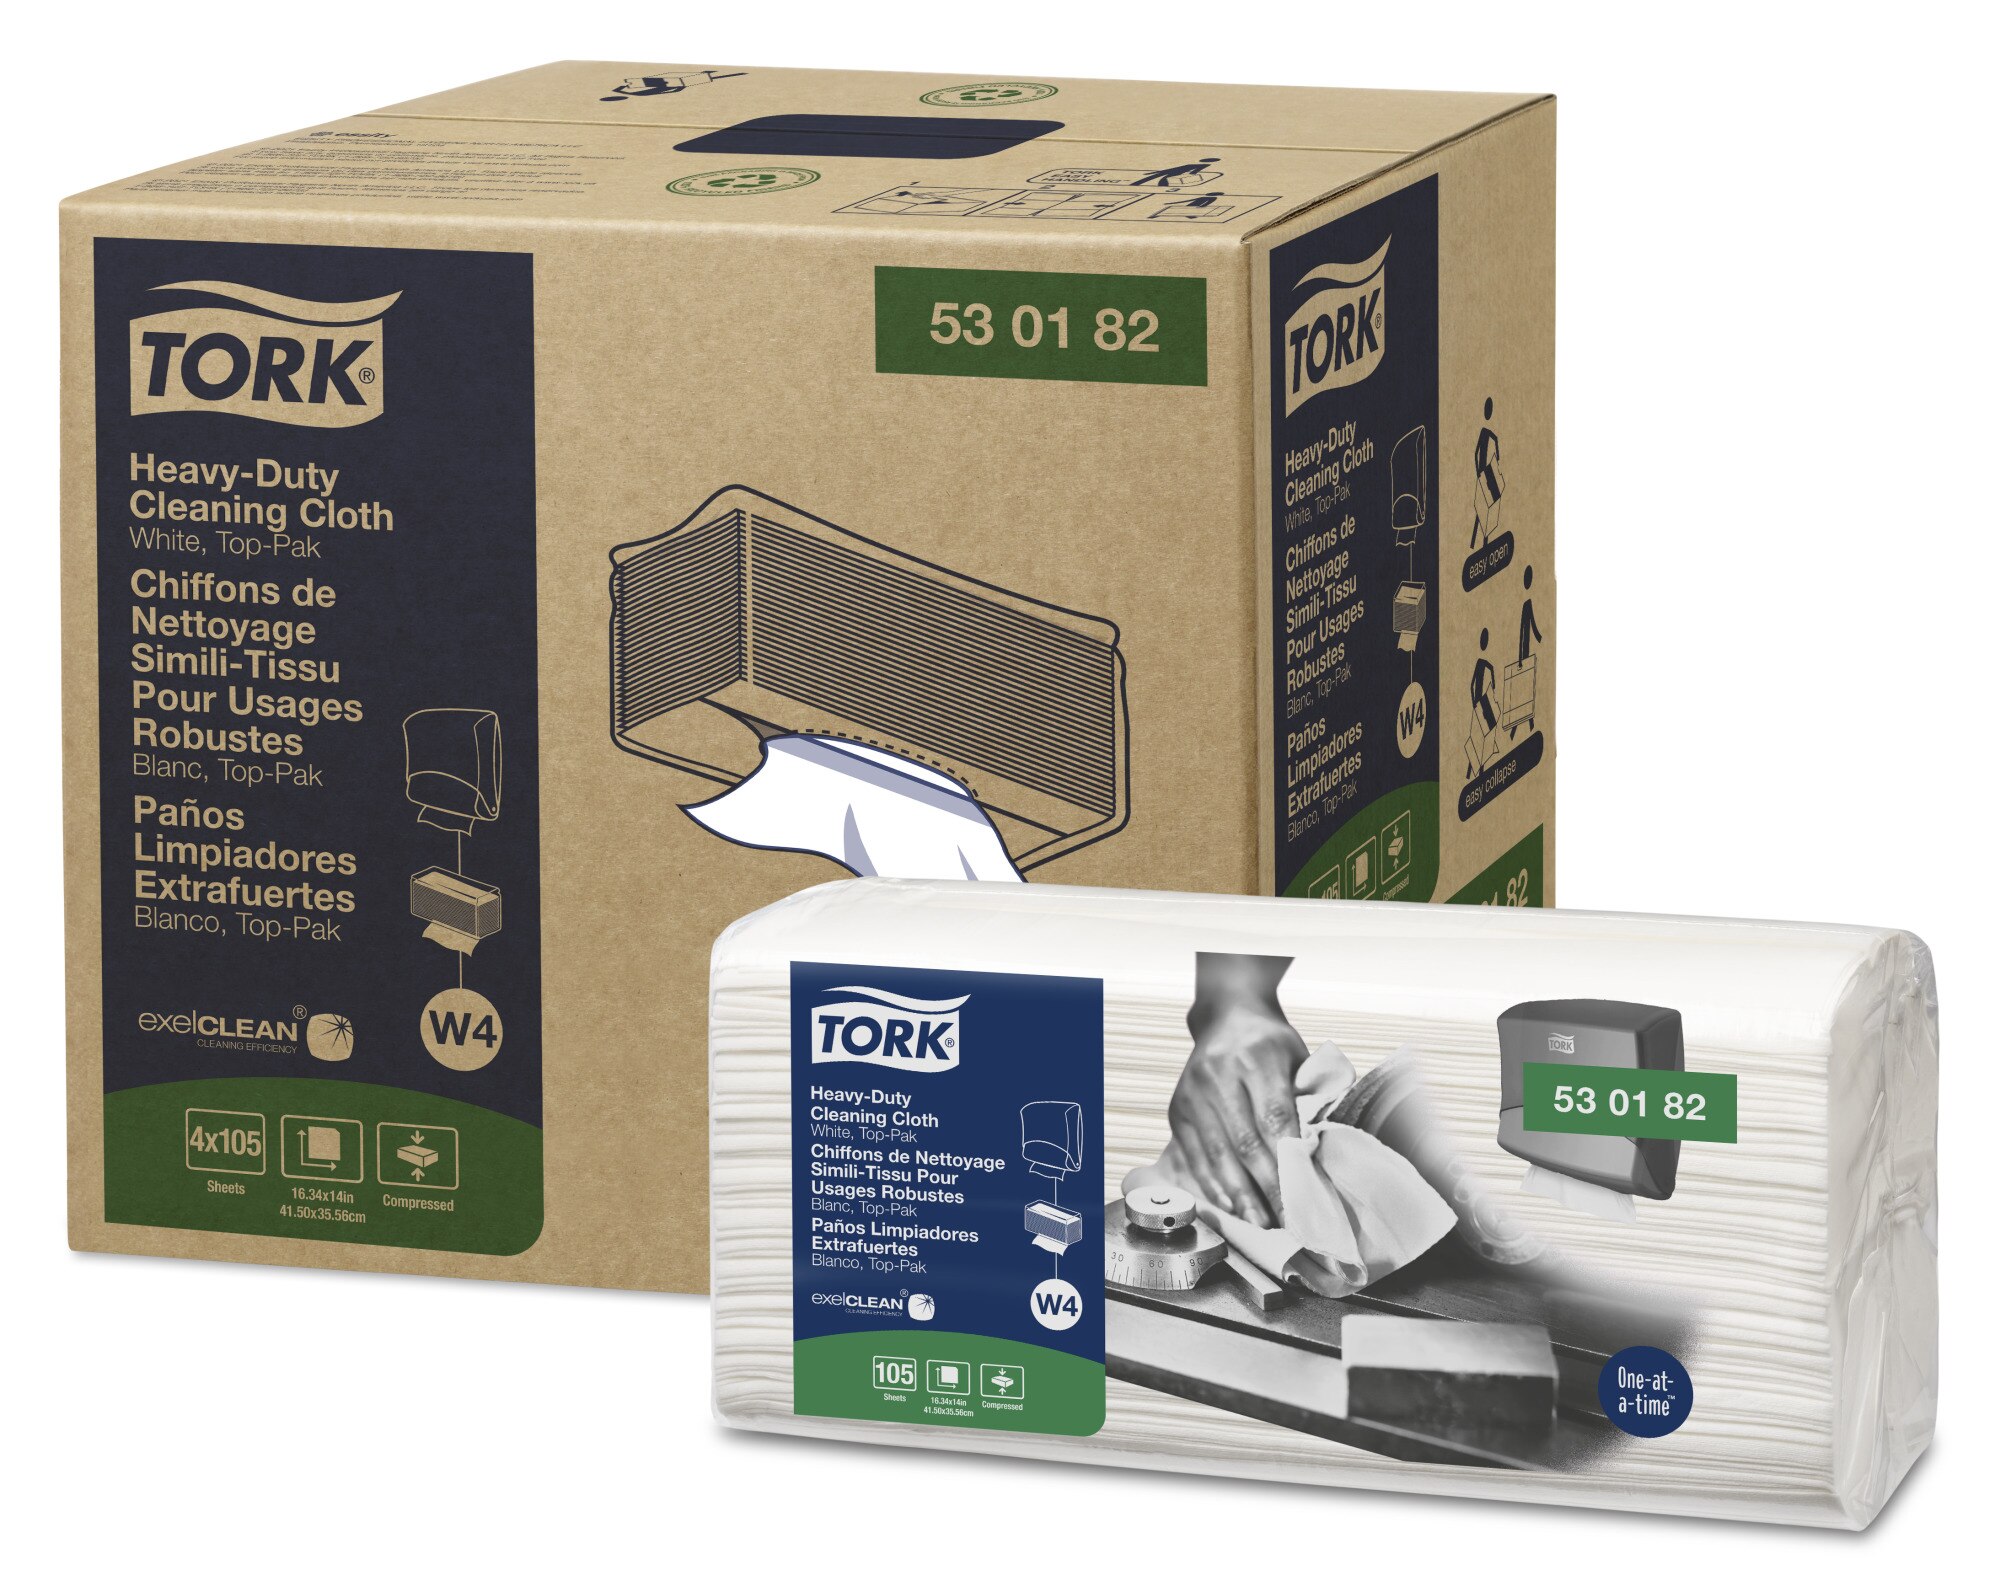 Tork Low-Lint Cleaning Cloth, Top-Pak | 192480 | Wipers and cloths 